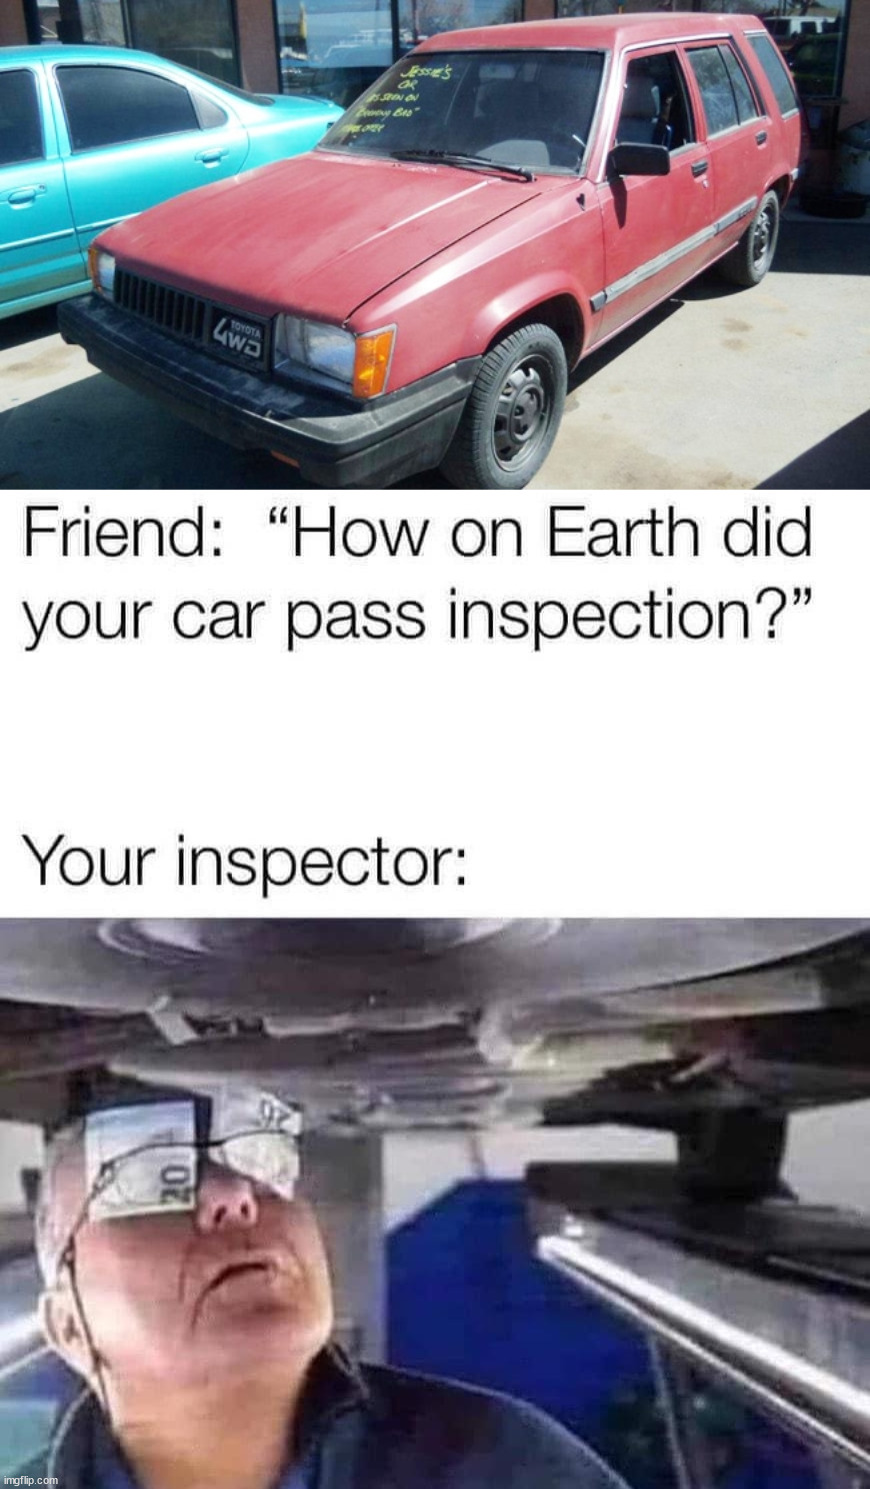 Grease the palms | image tagged in bad old car | made w/ Imgflip meme maker